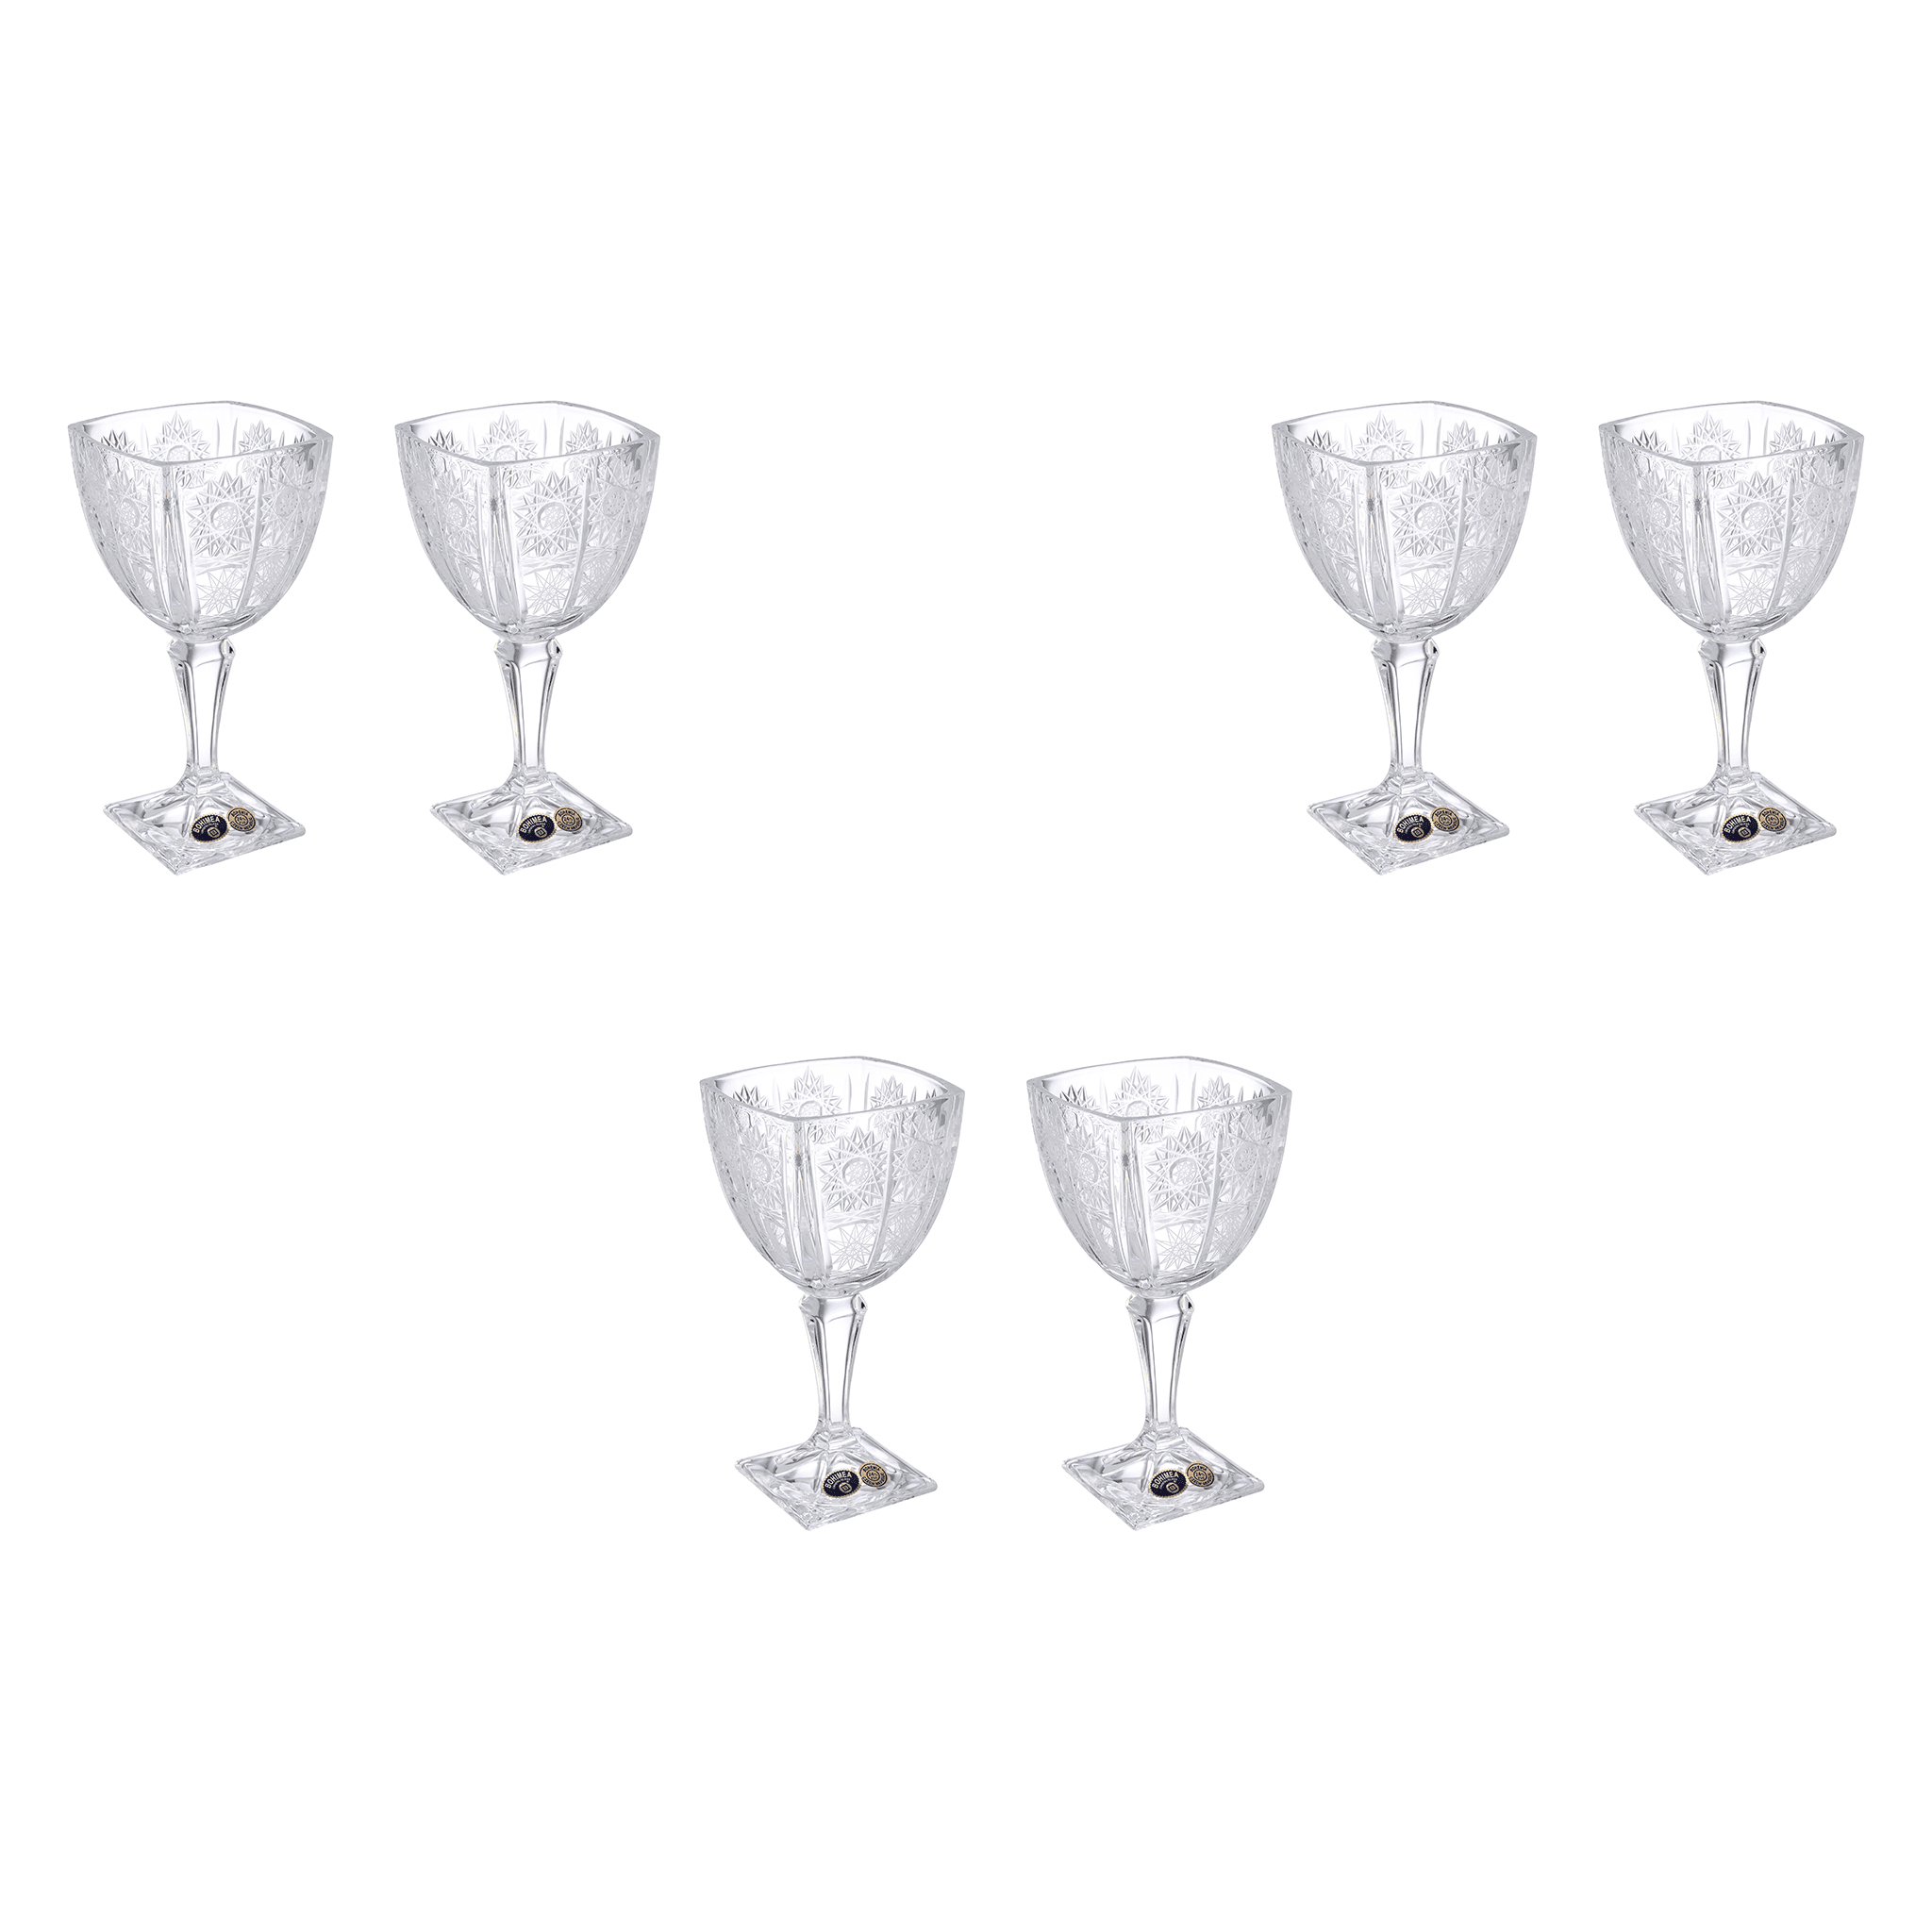 Bohemia Crystal - Square Goblet Glass Set 6 Pieces - 270ml - Crystal - 2700010168